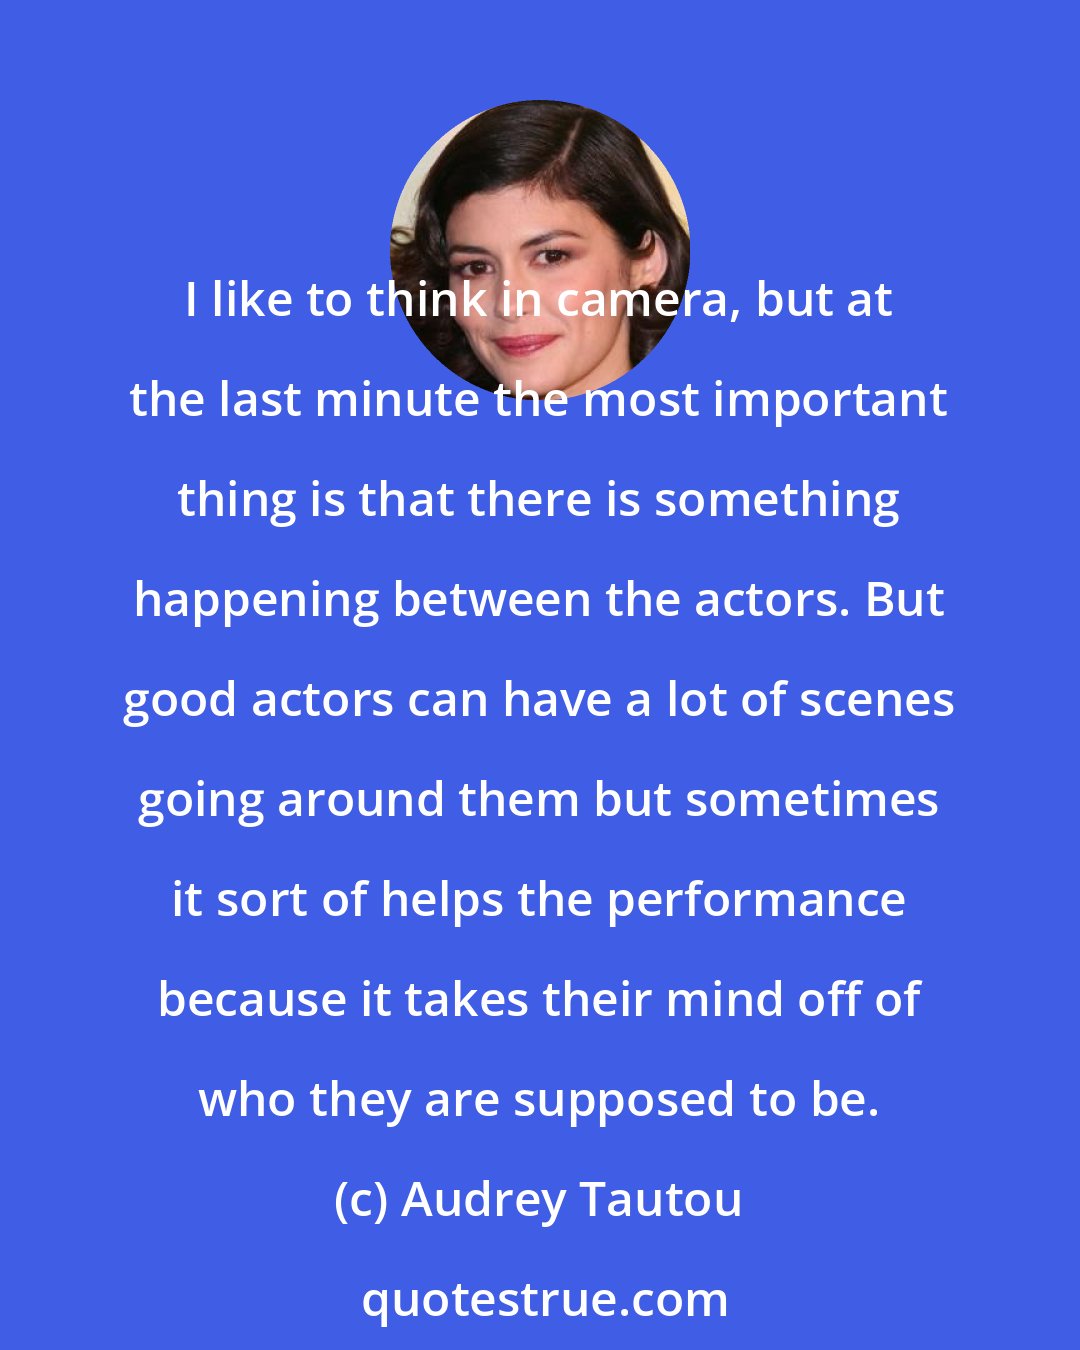 Audrey Tautou: I like to think in camera, but at the last minute the most important thing is that there is something happening between the actors. But good actors can have a lot of scenes going around them but sometimes it sort of helps the performance because it takes their mind off of who they are supposed to be.